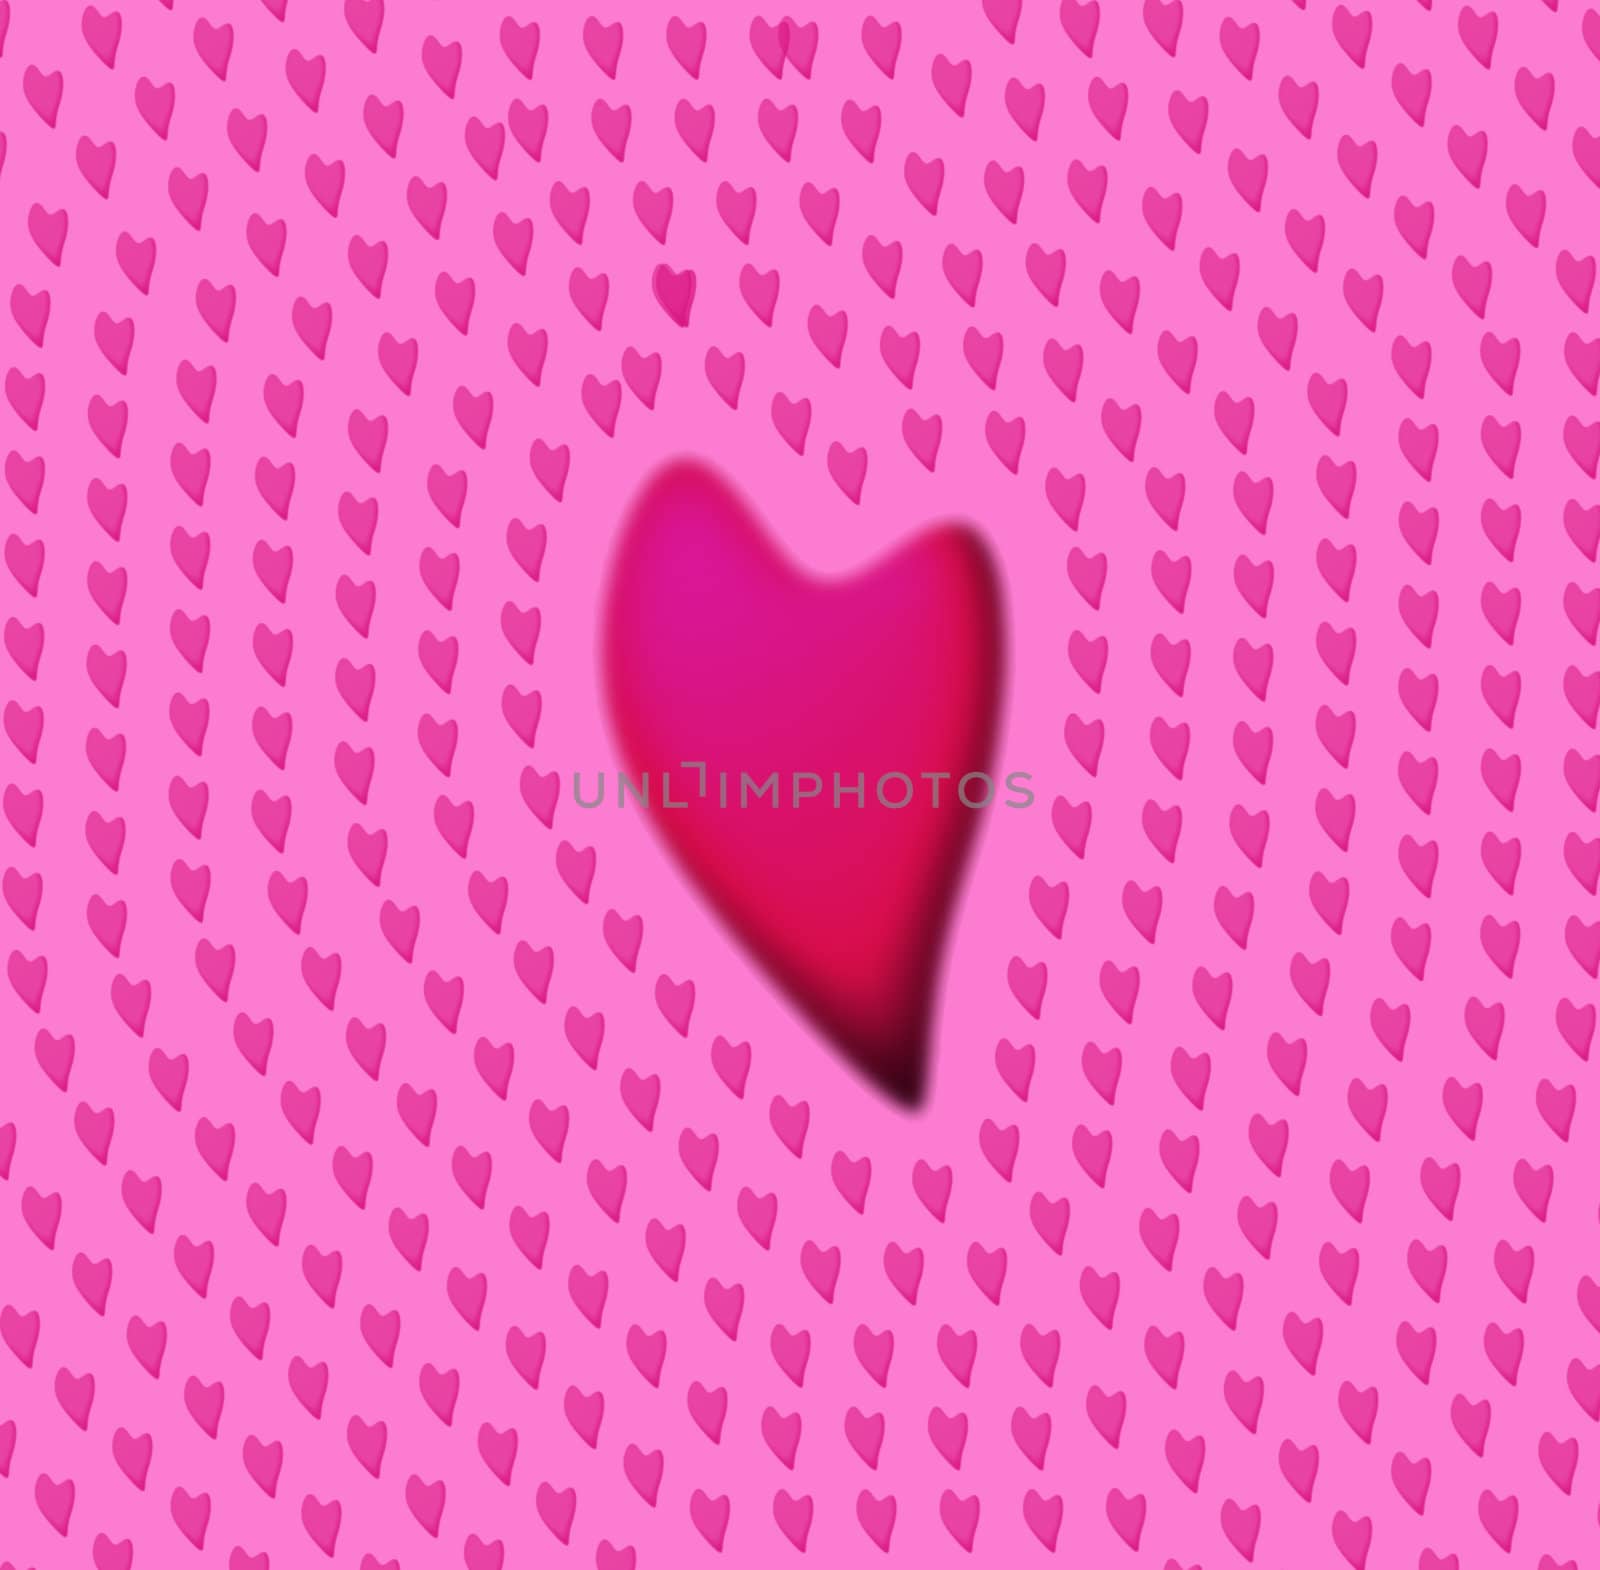 red and pink hearts background repeating pattern